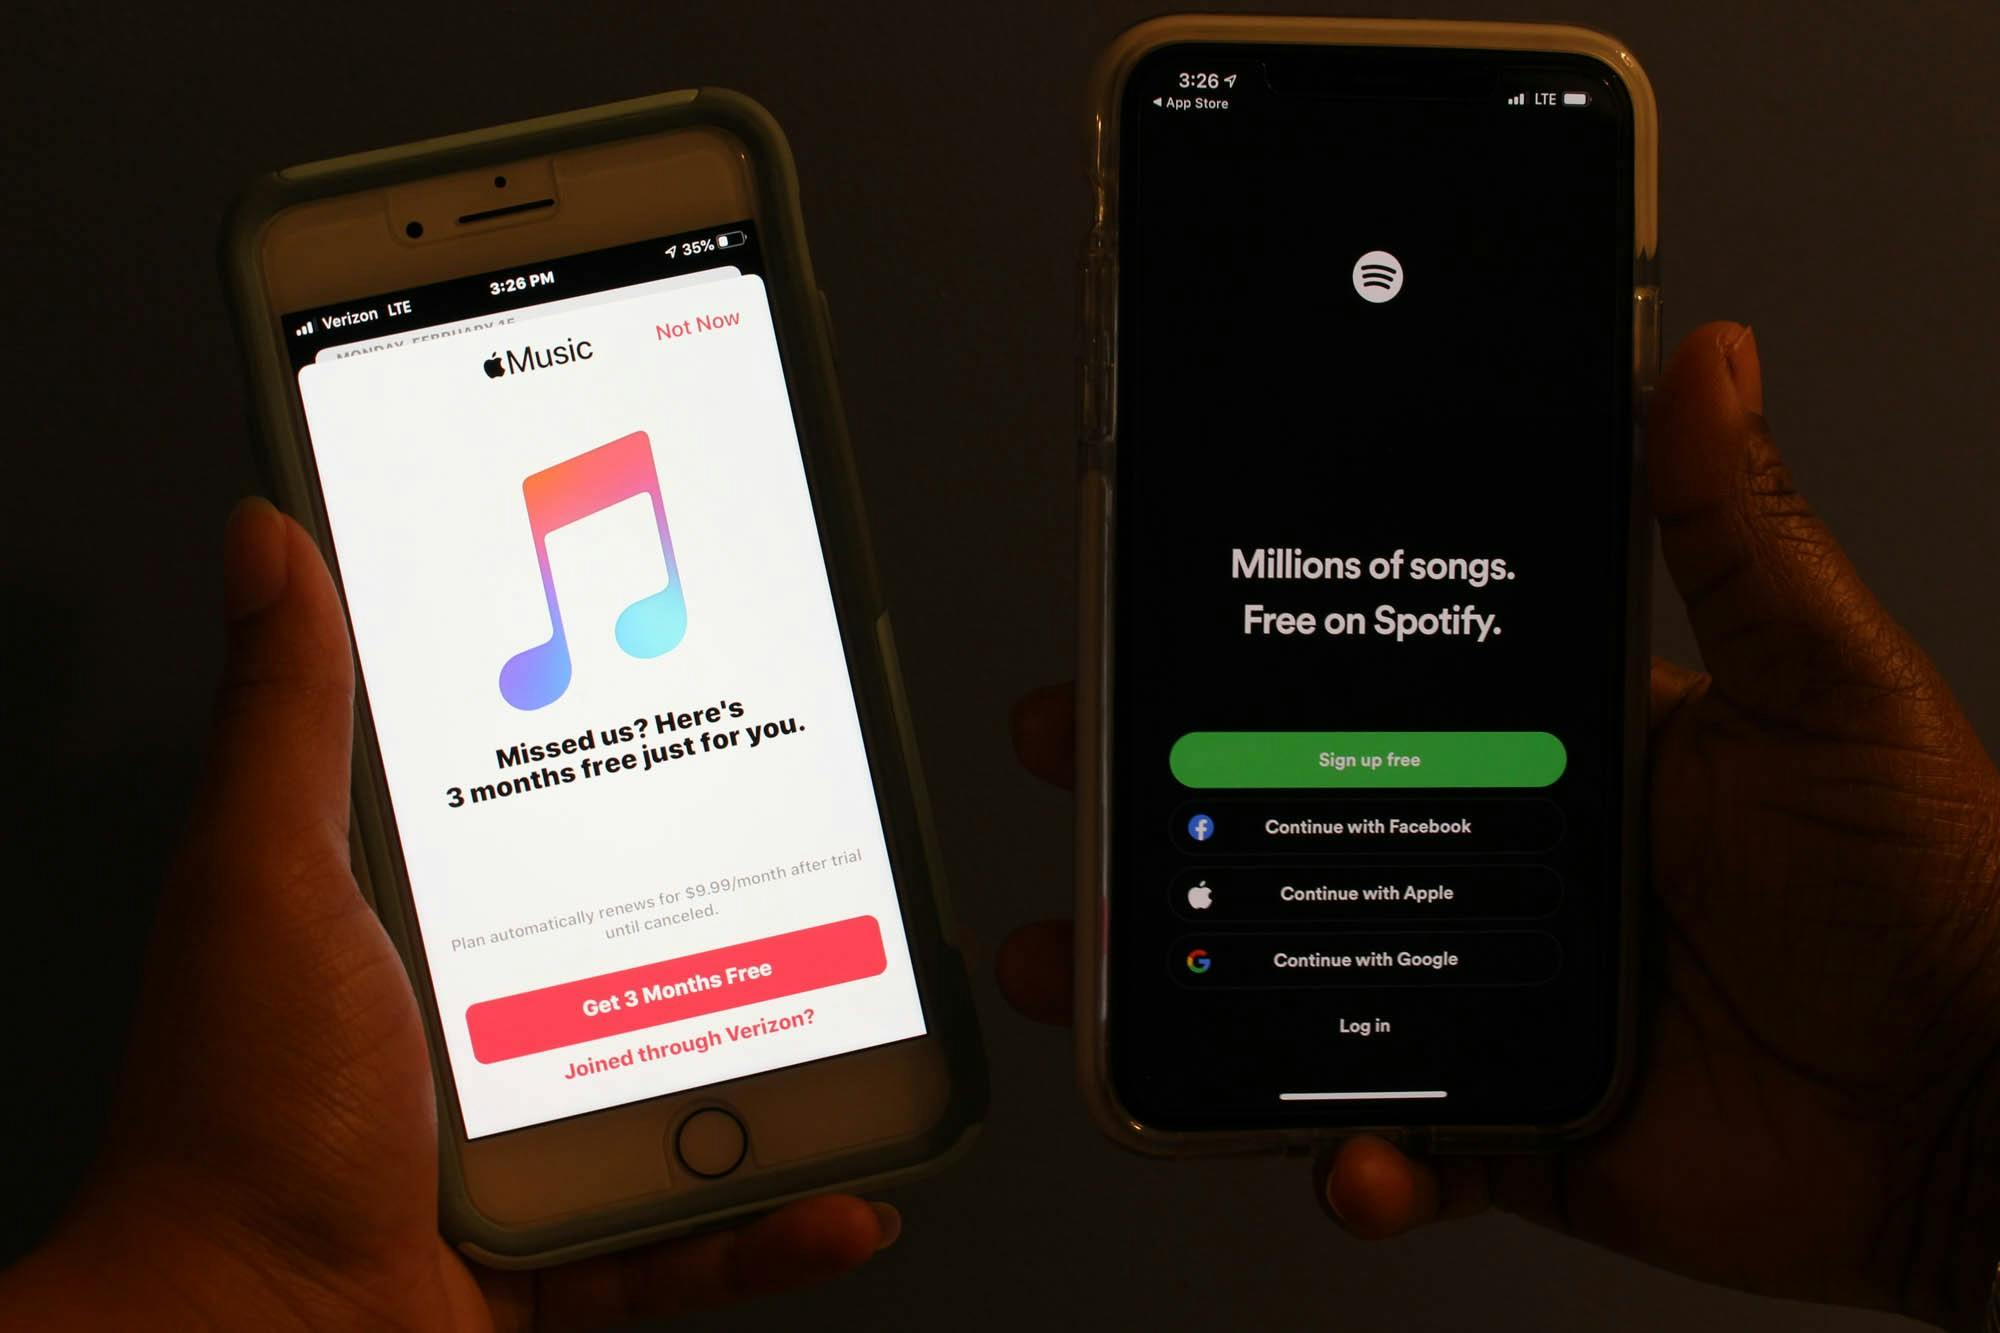 spotify to apple music converter without subscription